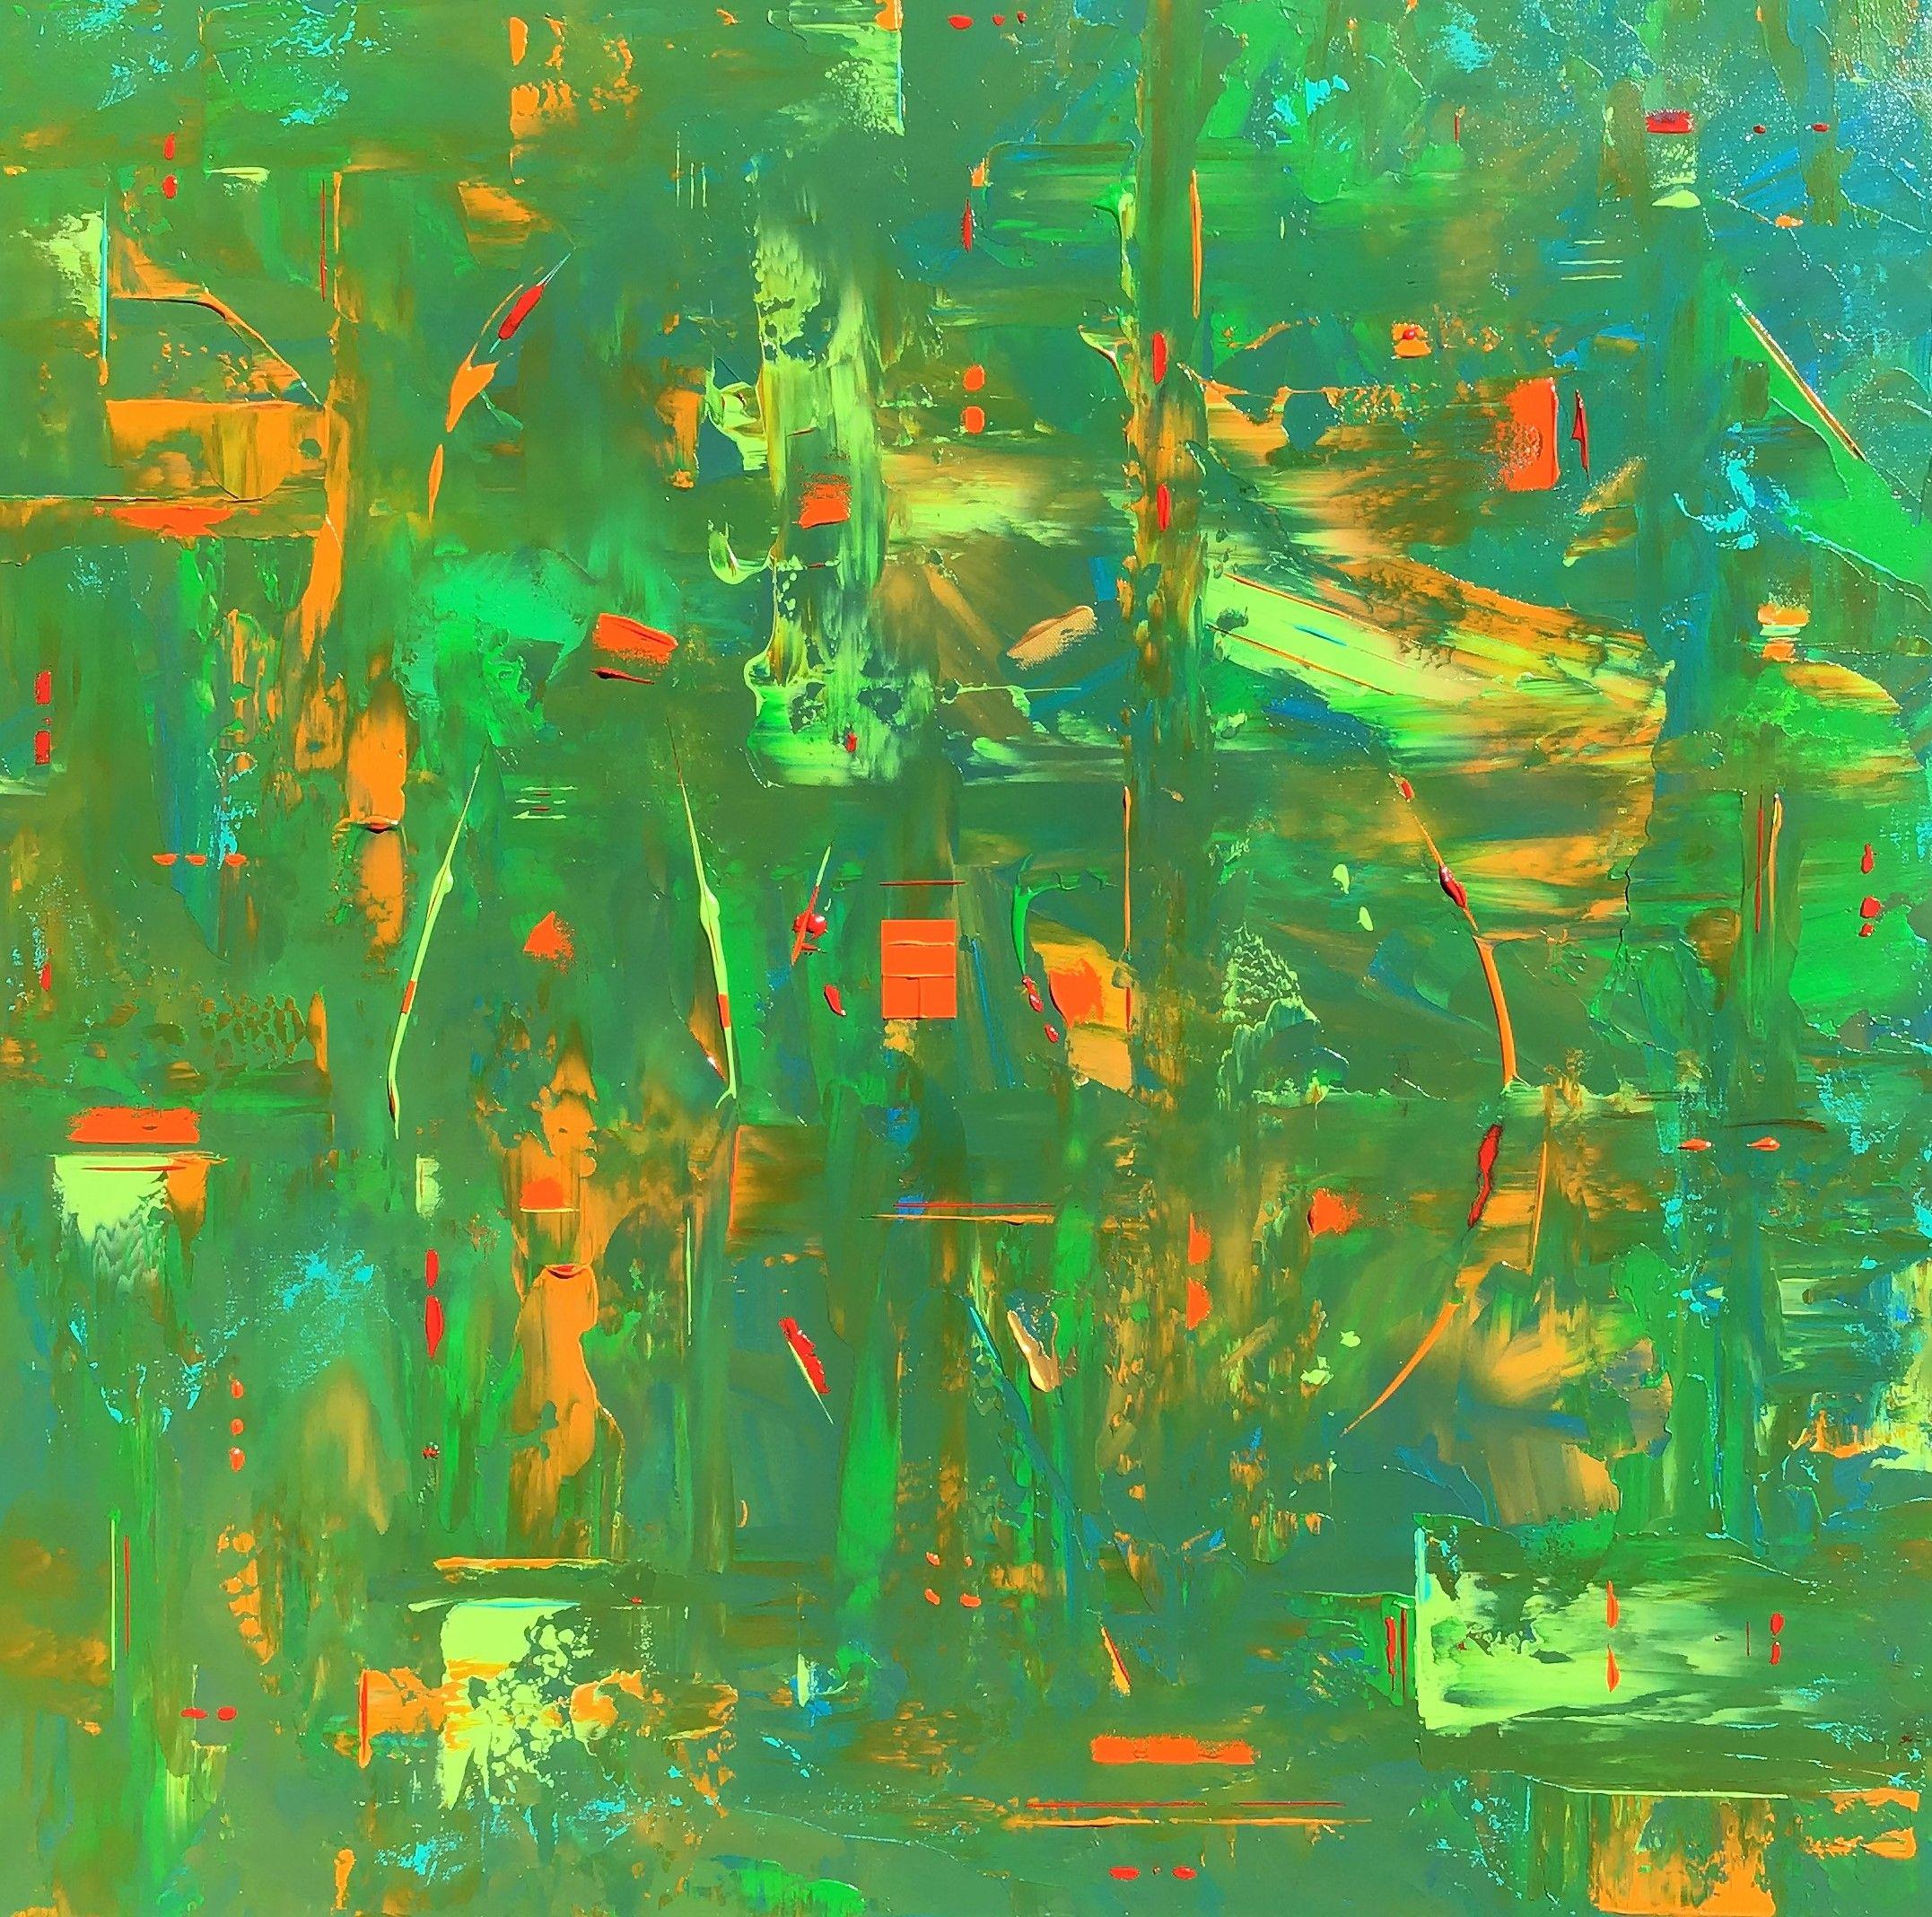 Robert Lynn Abstract Painting - Vibrant Green Blue Orange Abstract, Painting, Acrylic on Canvas